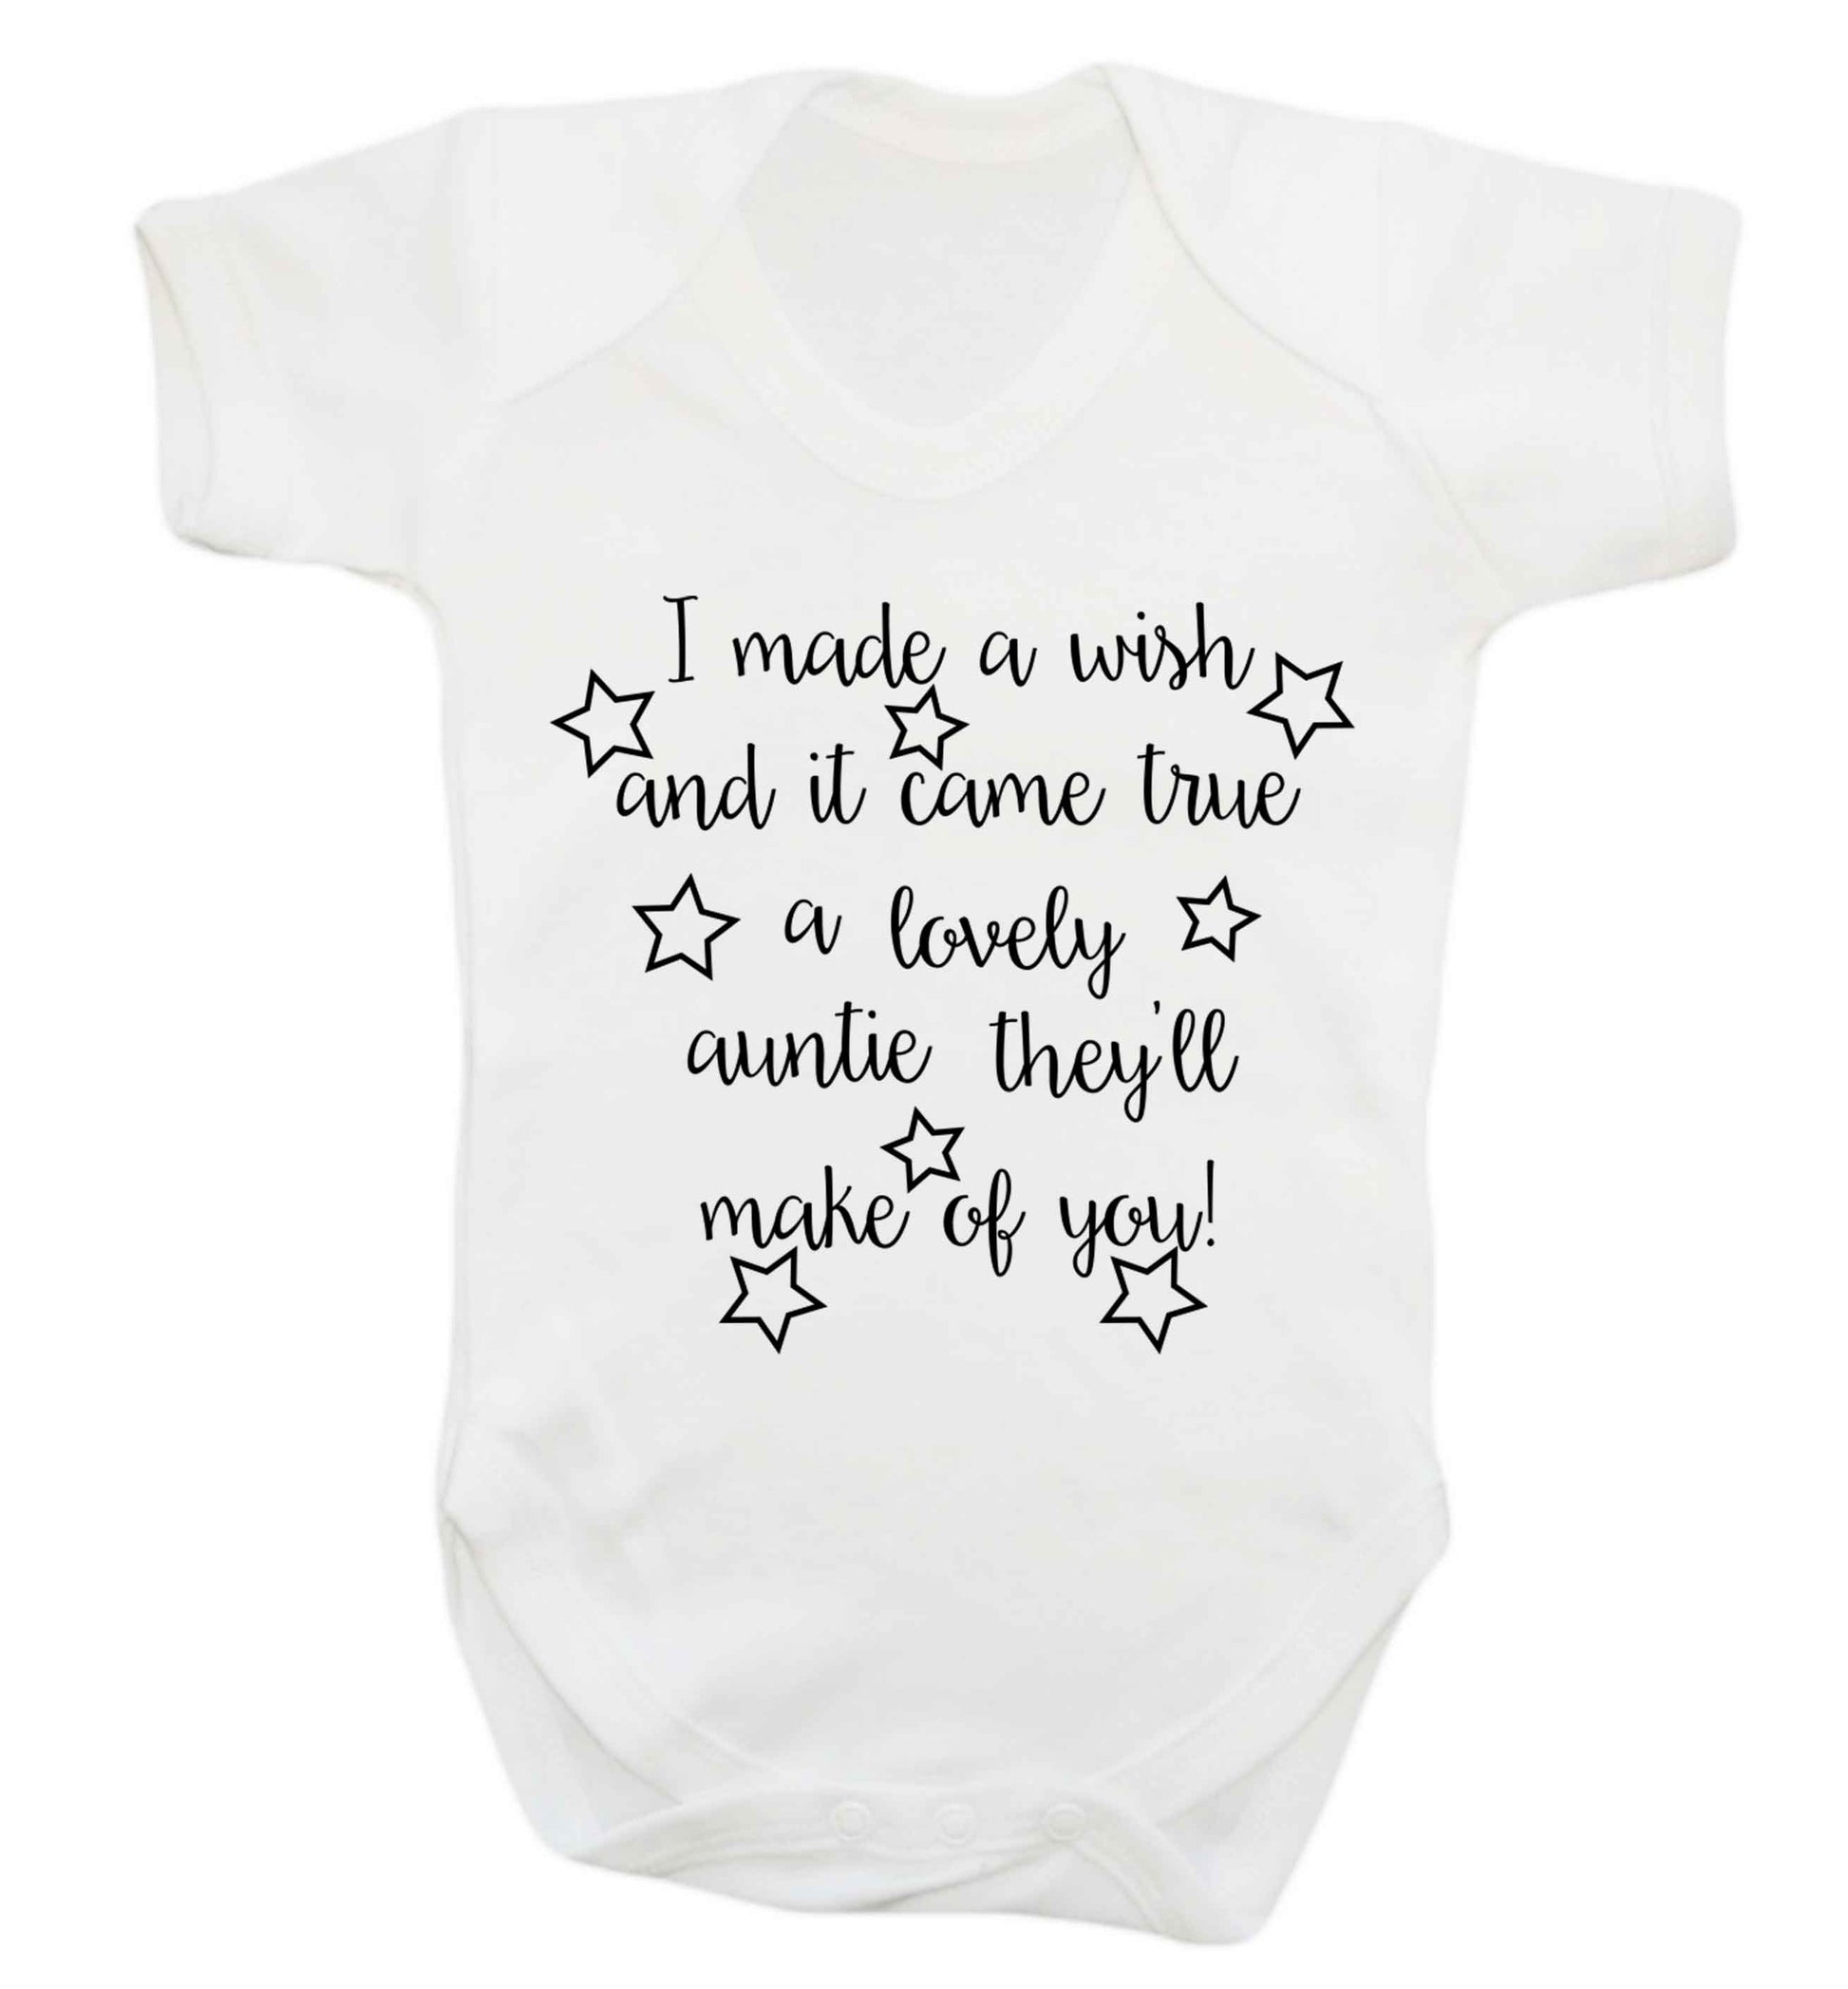 I made a wish and it came true a lovely auntie they'll make of you! Baby Vest white 18-24 months